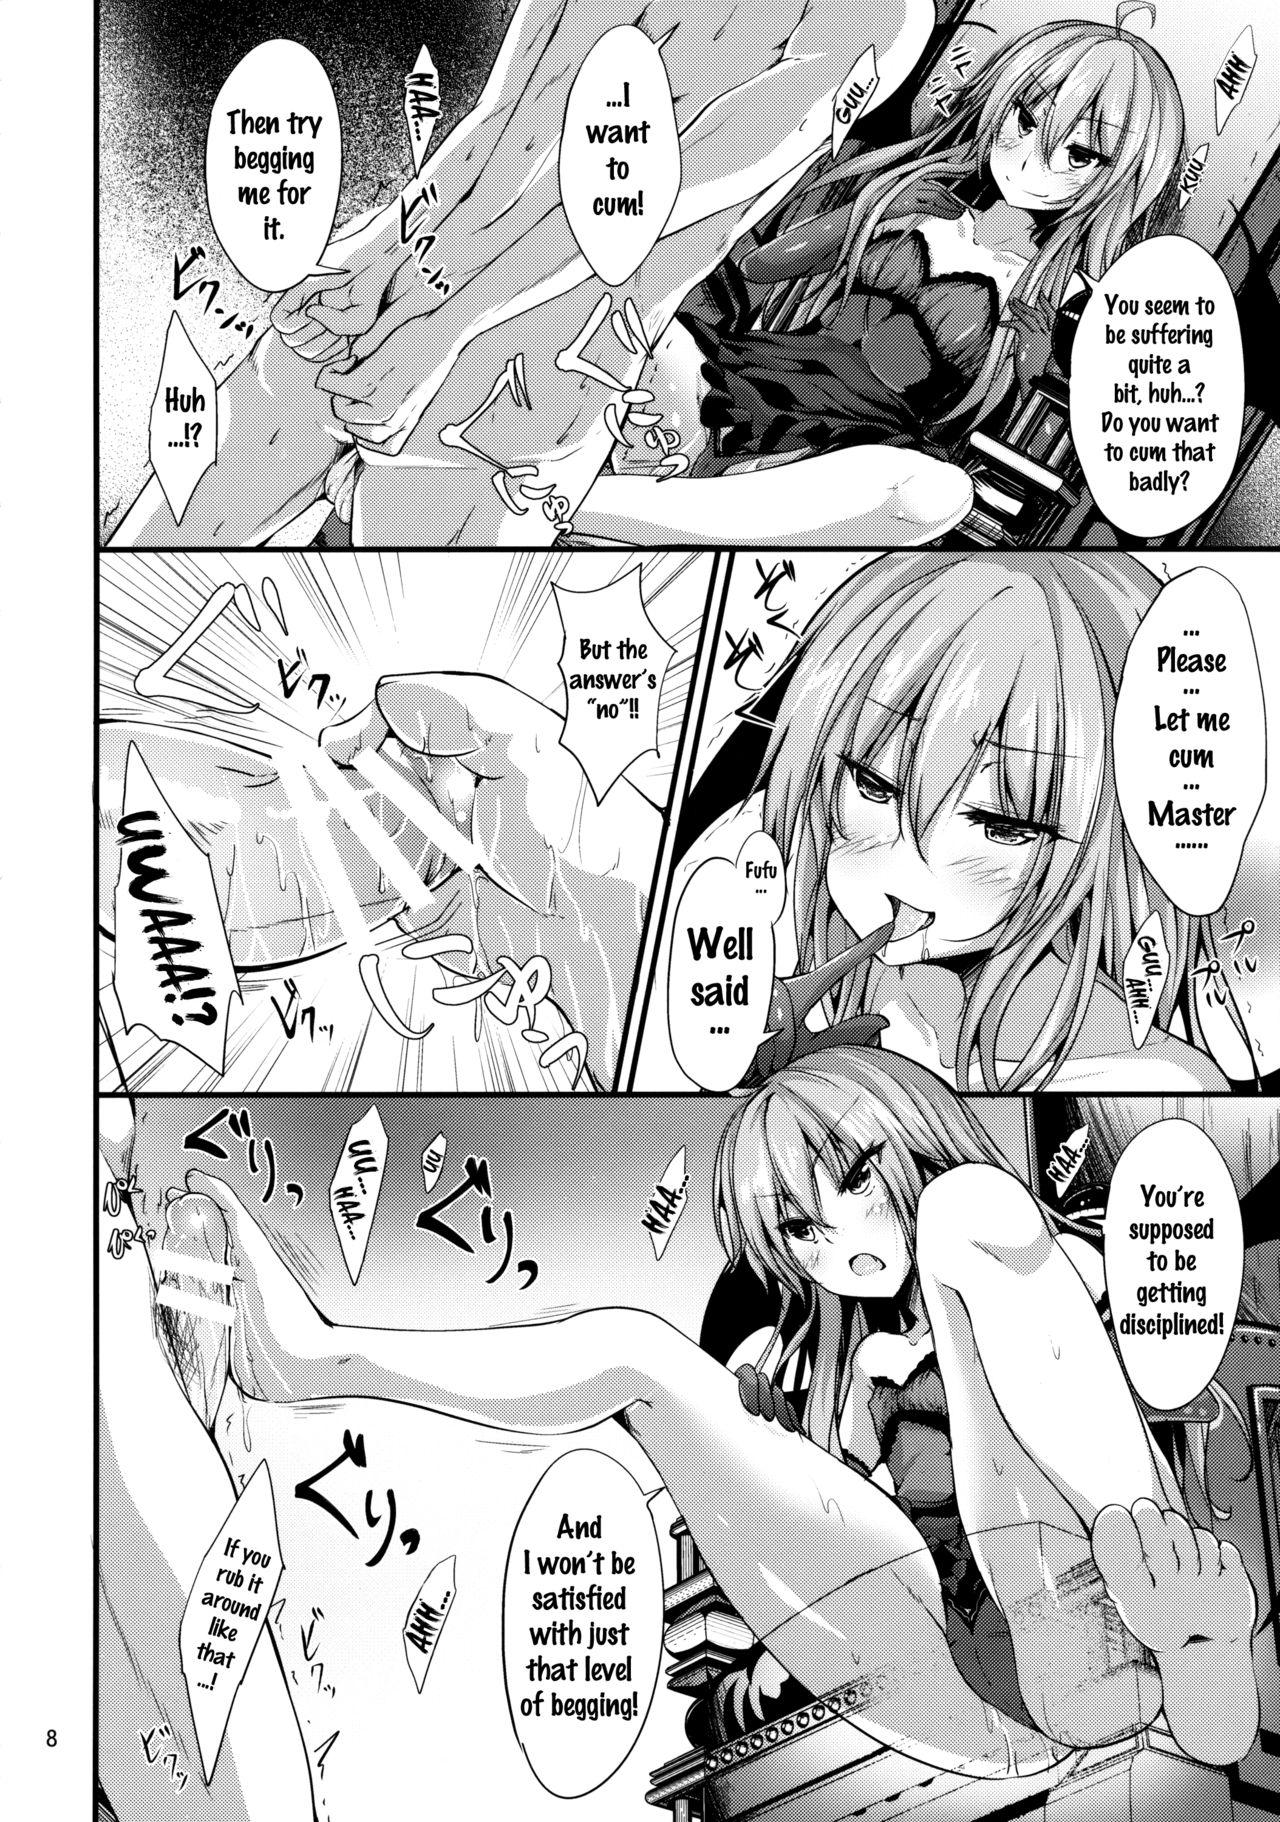 Home Remi no Motto Otona ni Narumon! | Remi's Becoming More of An Adult! - Touhou project Insertion - Page 7